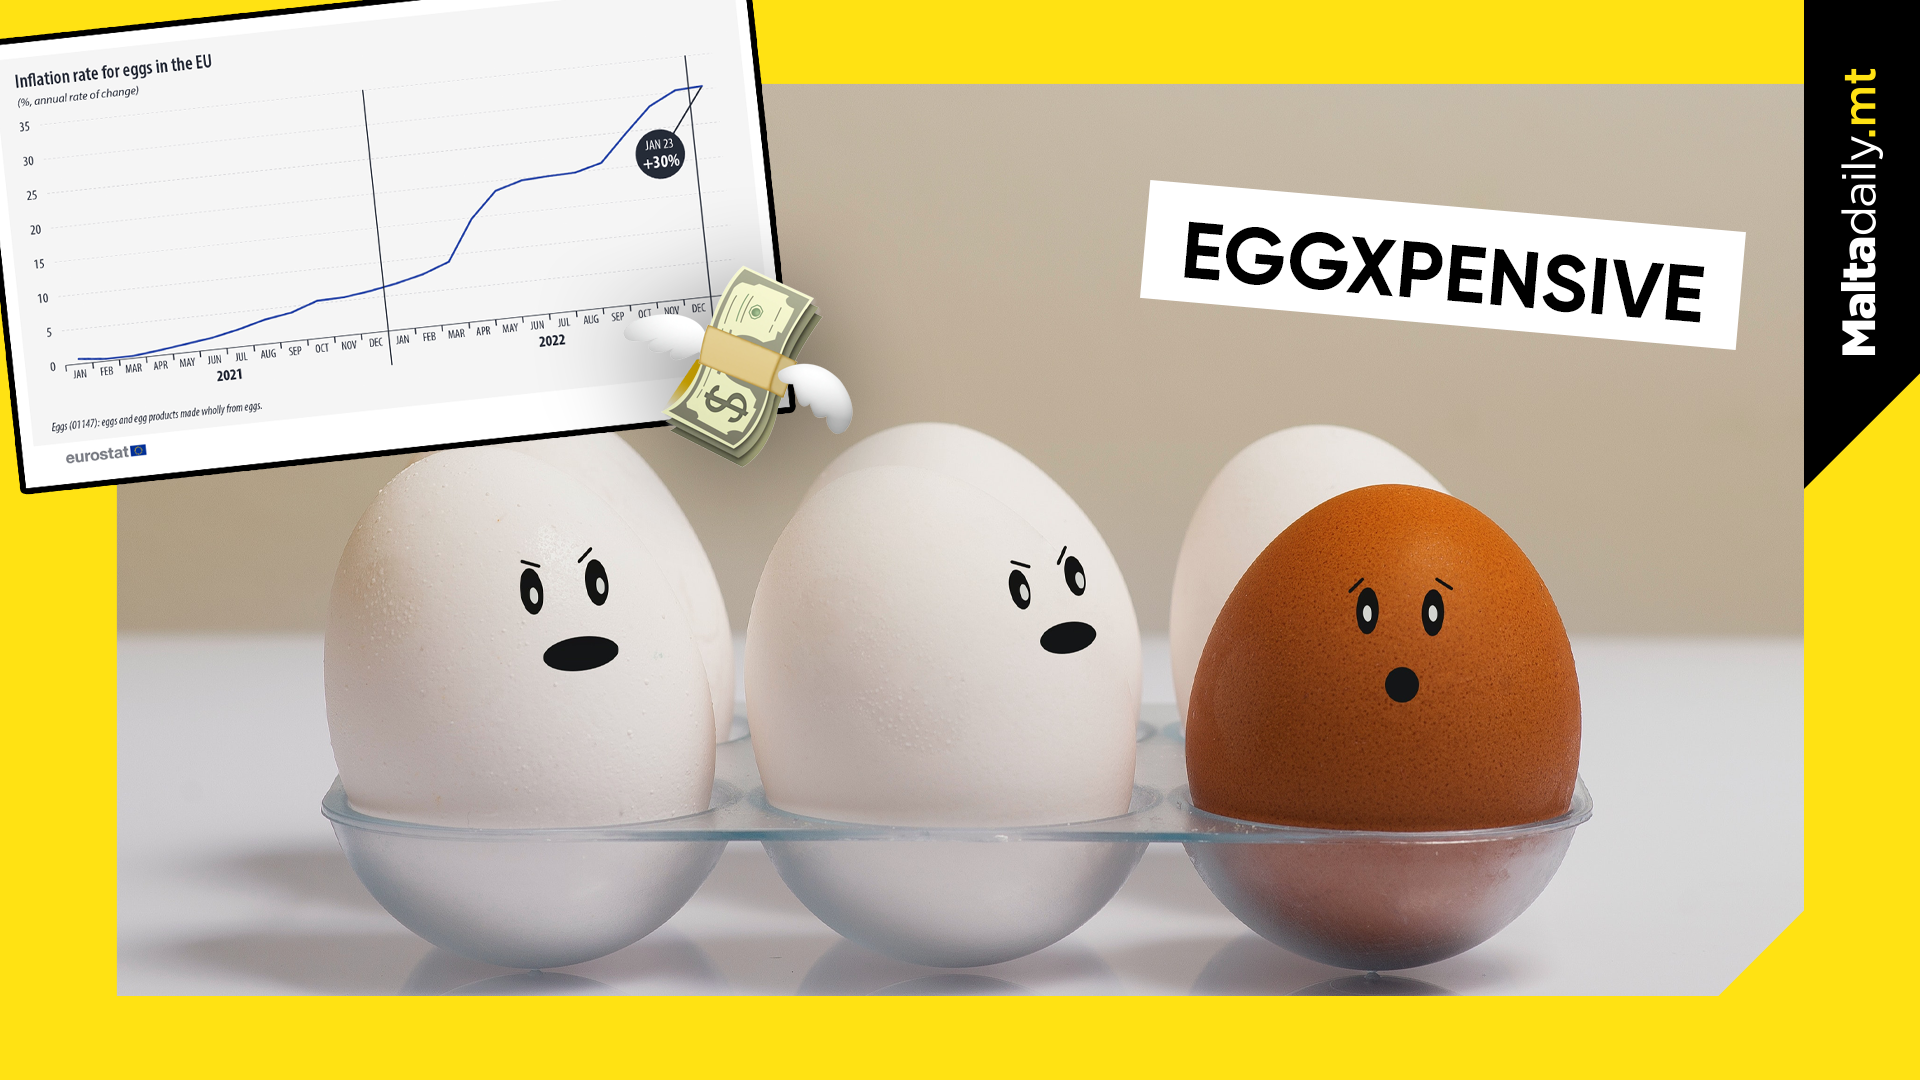 Egg-xpensive Prices: EU sees a 30% Increase in Egg Costs